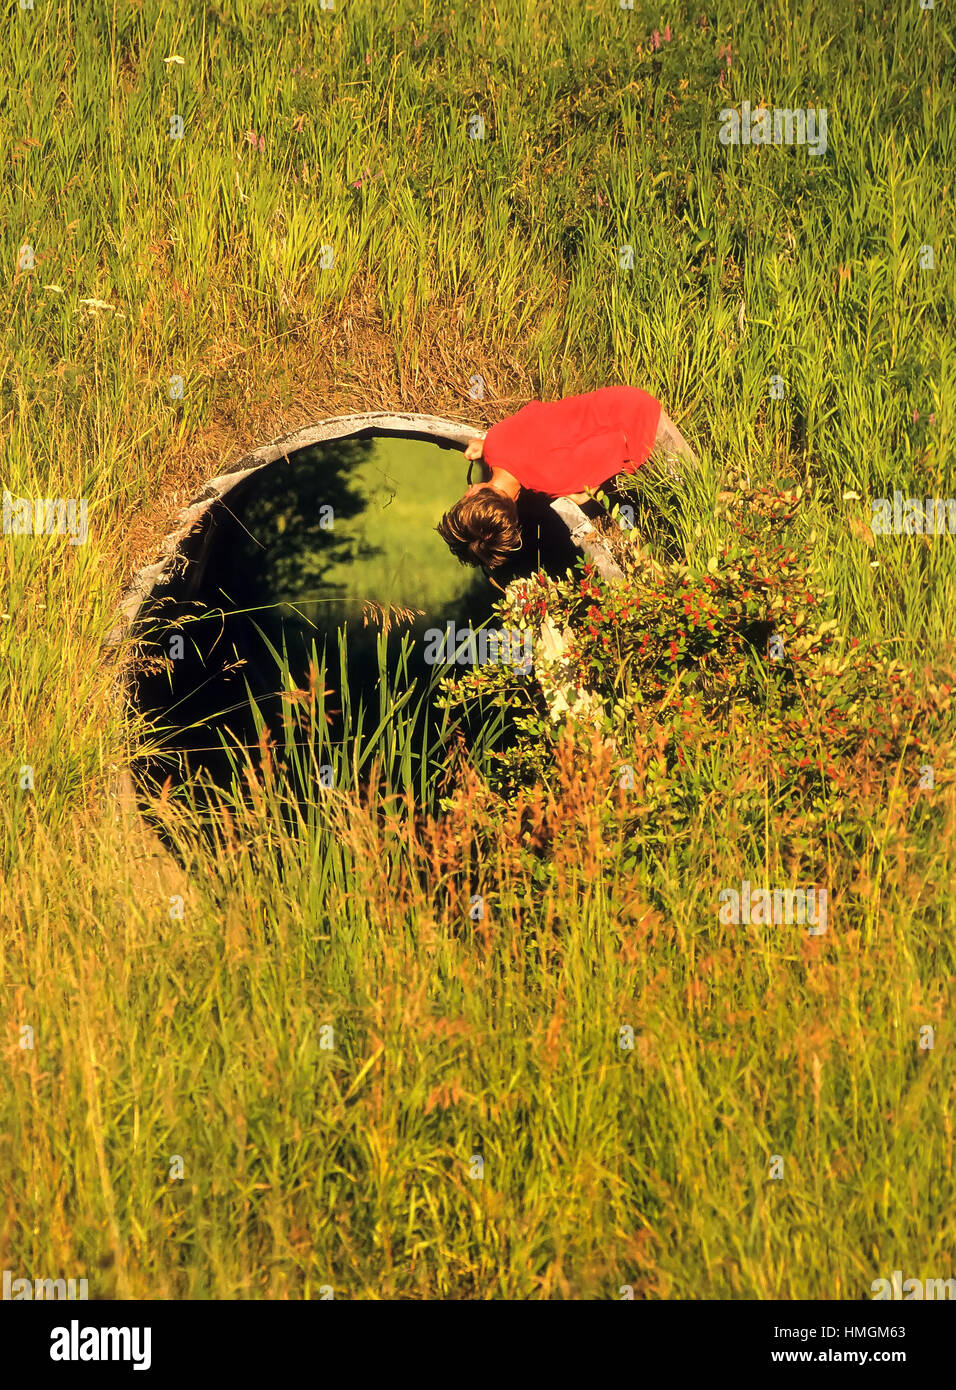 Young boy exploring a culvert in a grassy field. Digital scan from slide. Stock Photo